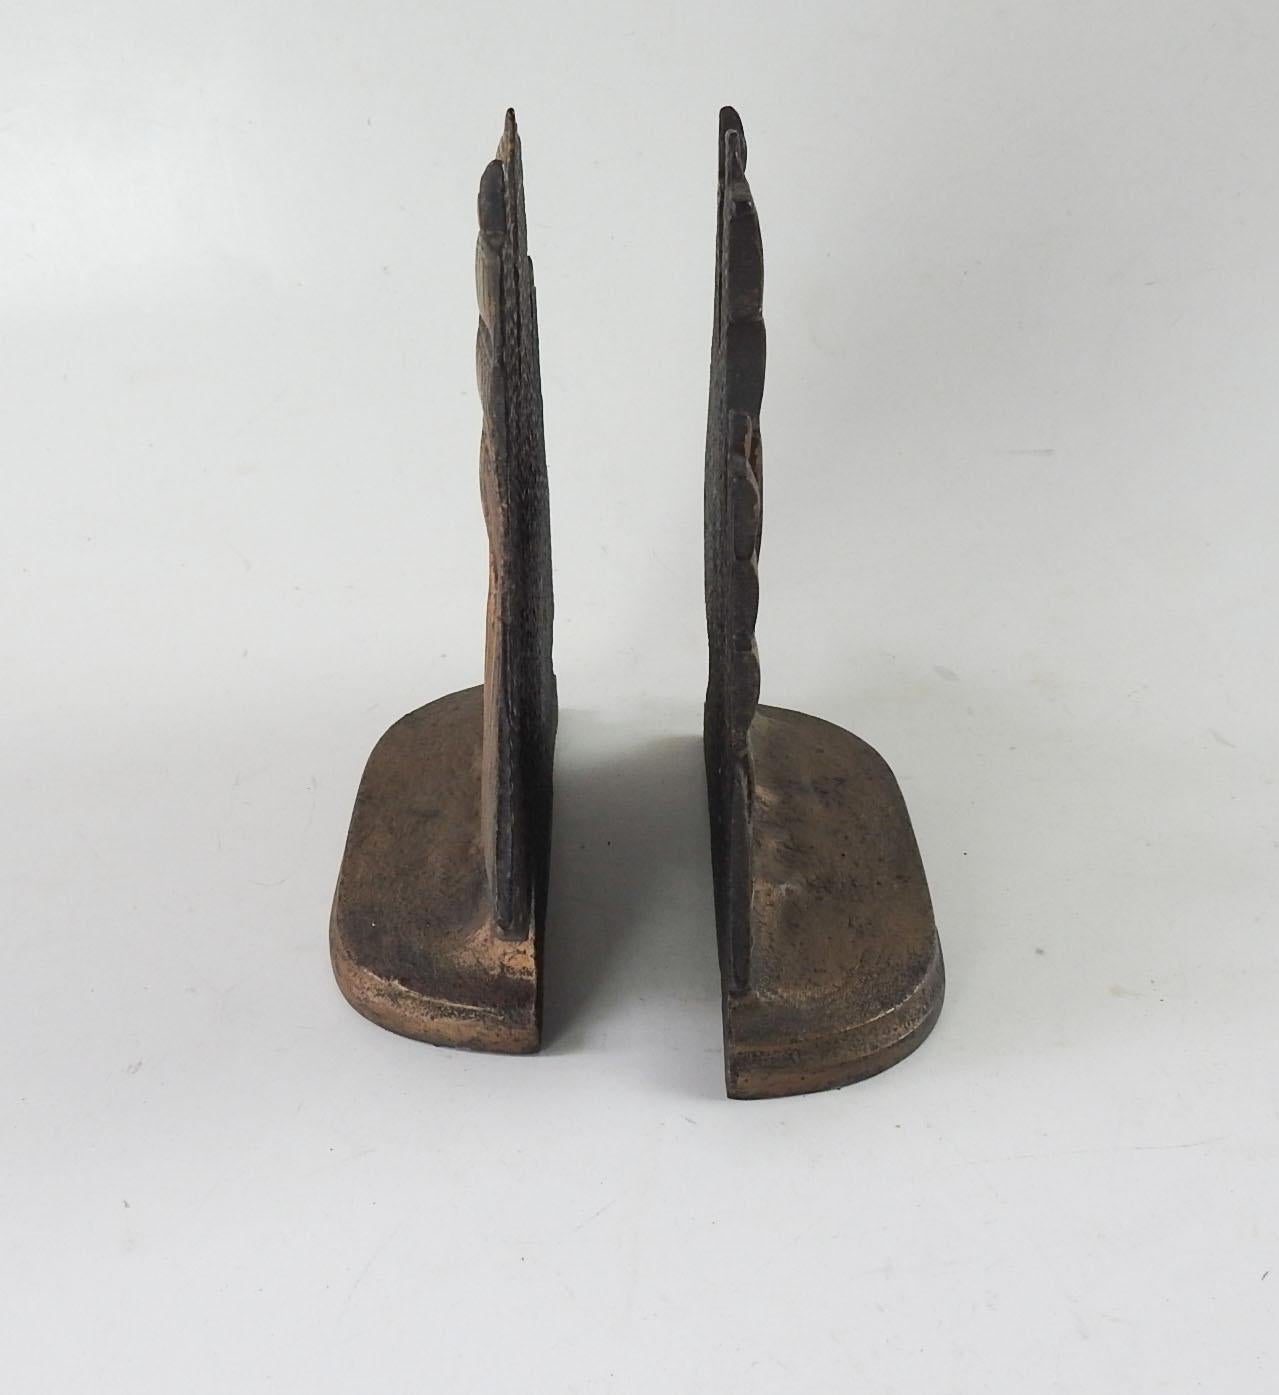 Vintage pair of cast iron sailing ship bookends. Marked Bron Met on back, overall wear to gold painted finish, felt bottoms missing.